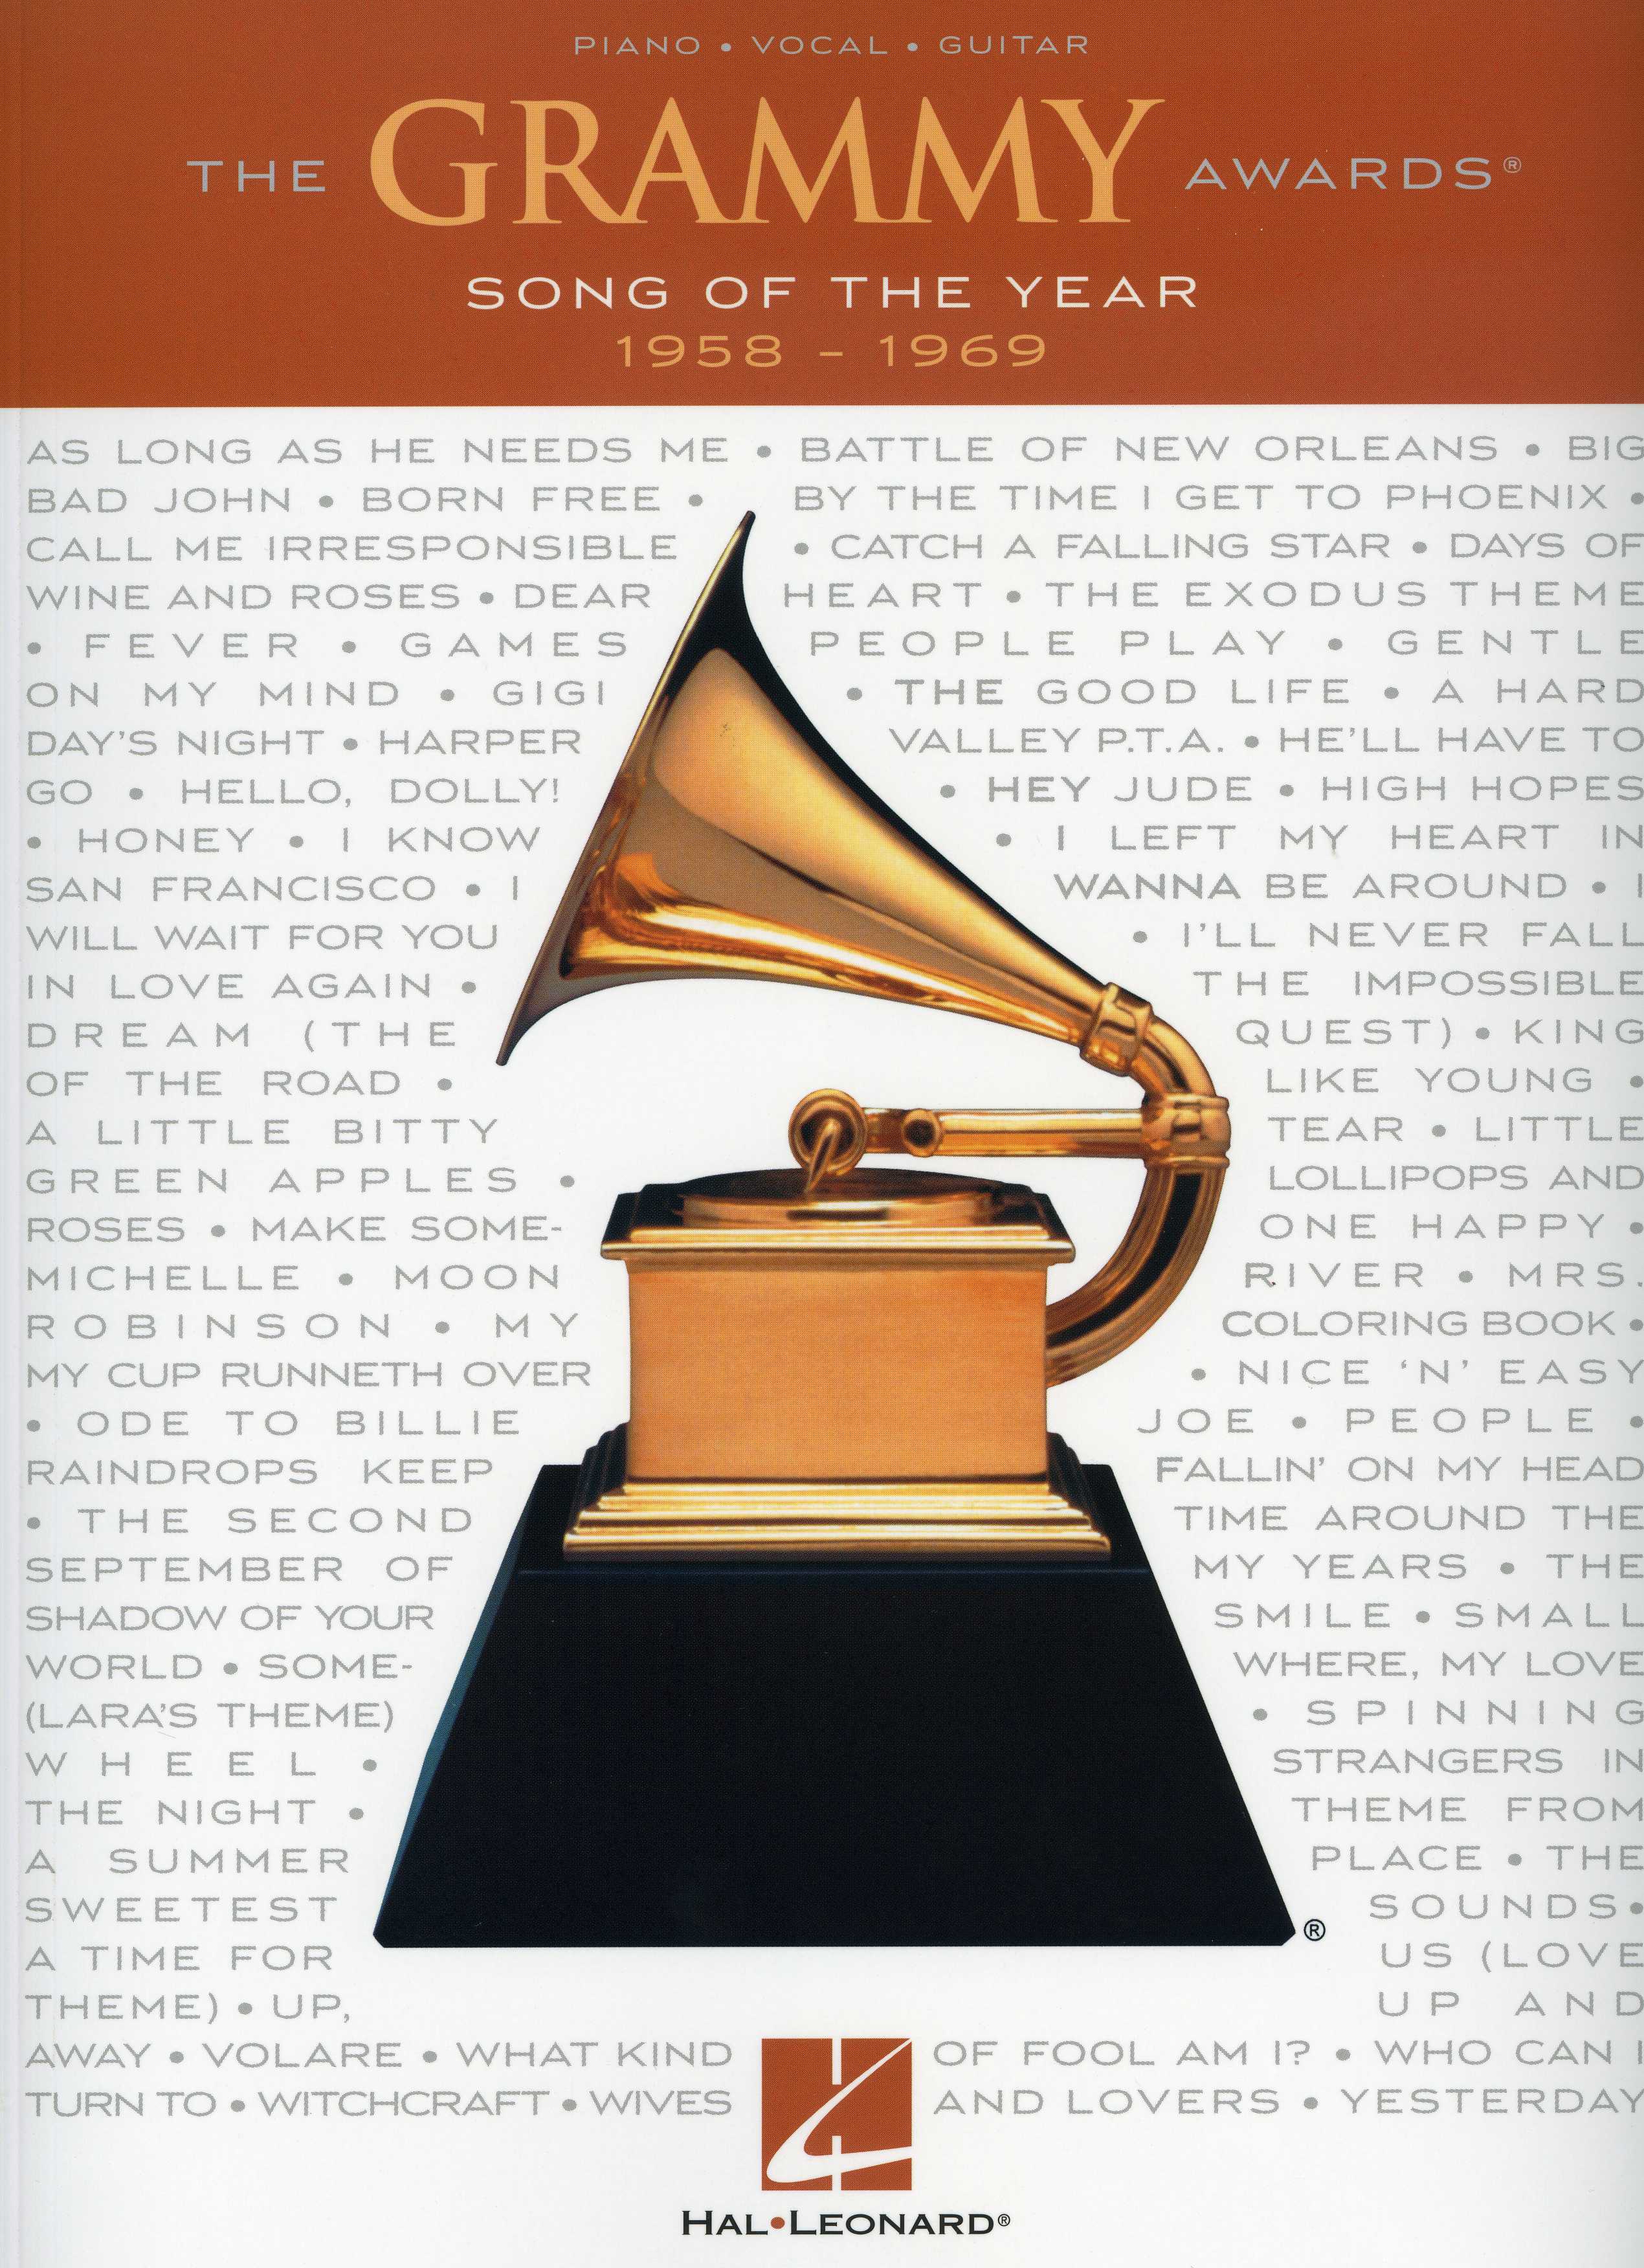 The Grammy Awards Song Of The Year 1958 - 1969